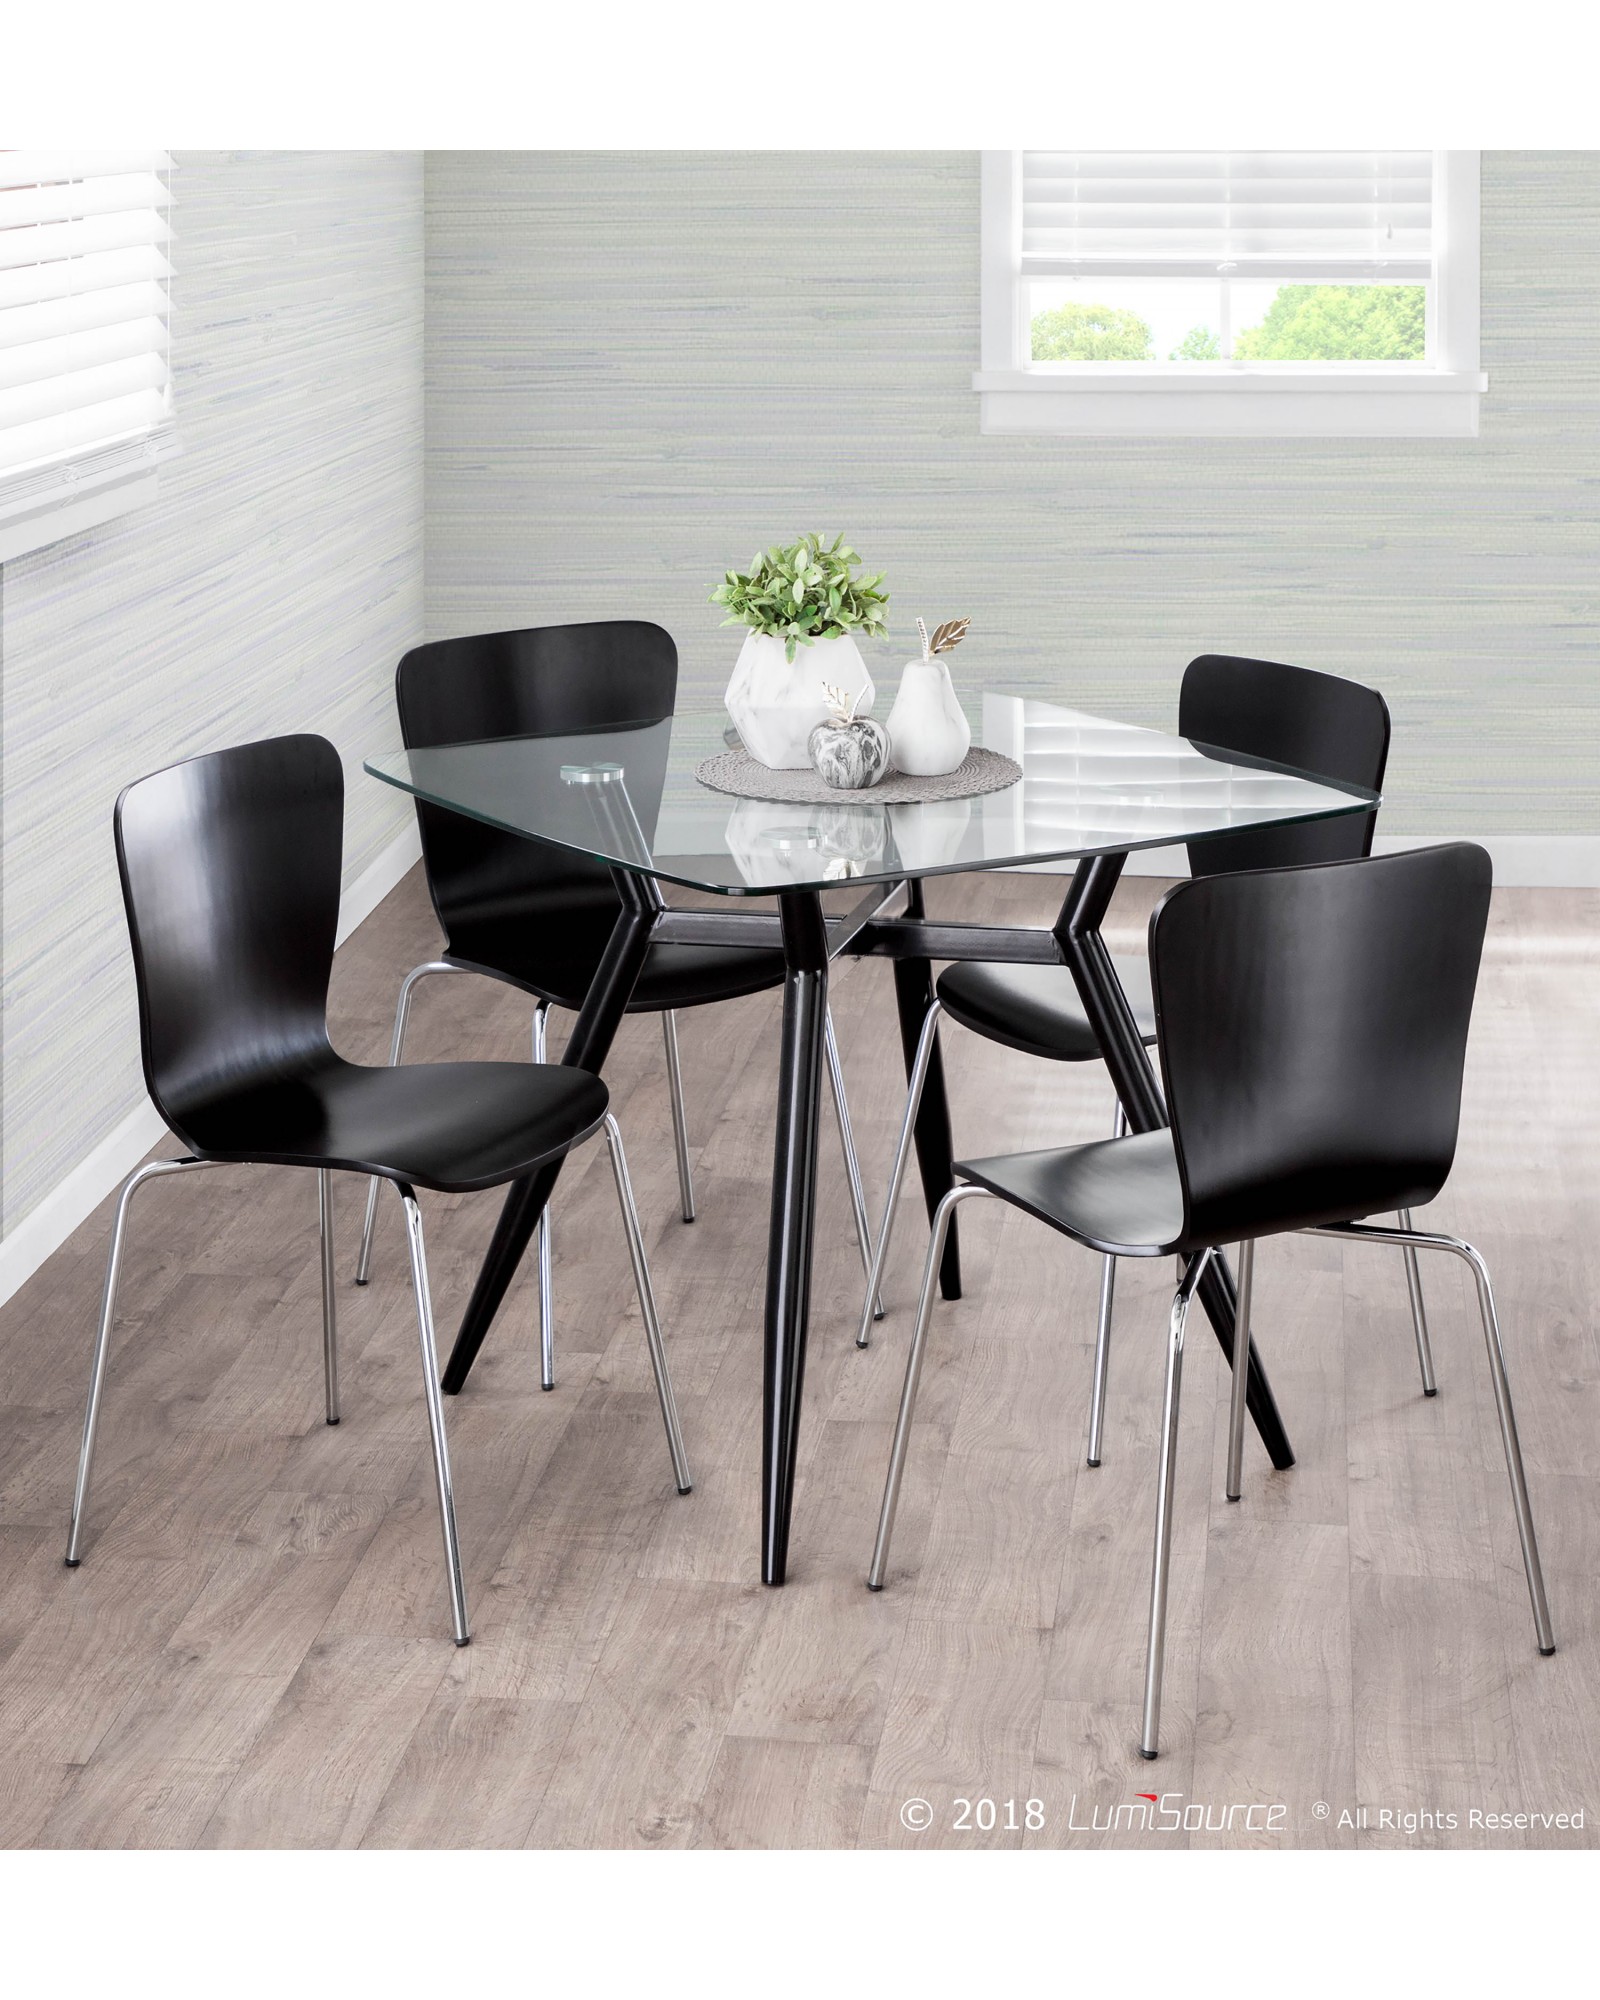 Bentwood Contemporary Stackable Dining Chair in Black Wood and Chrome - Set of 4